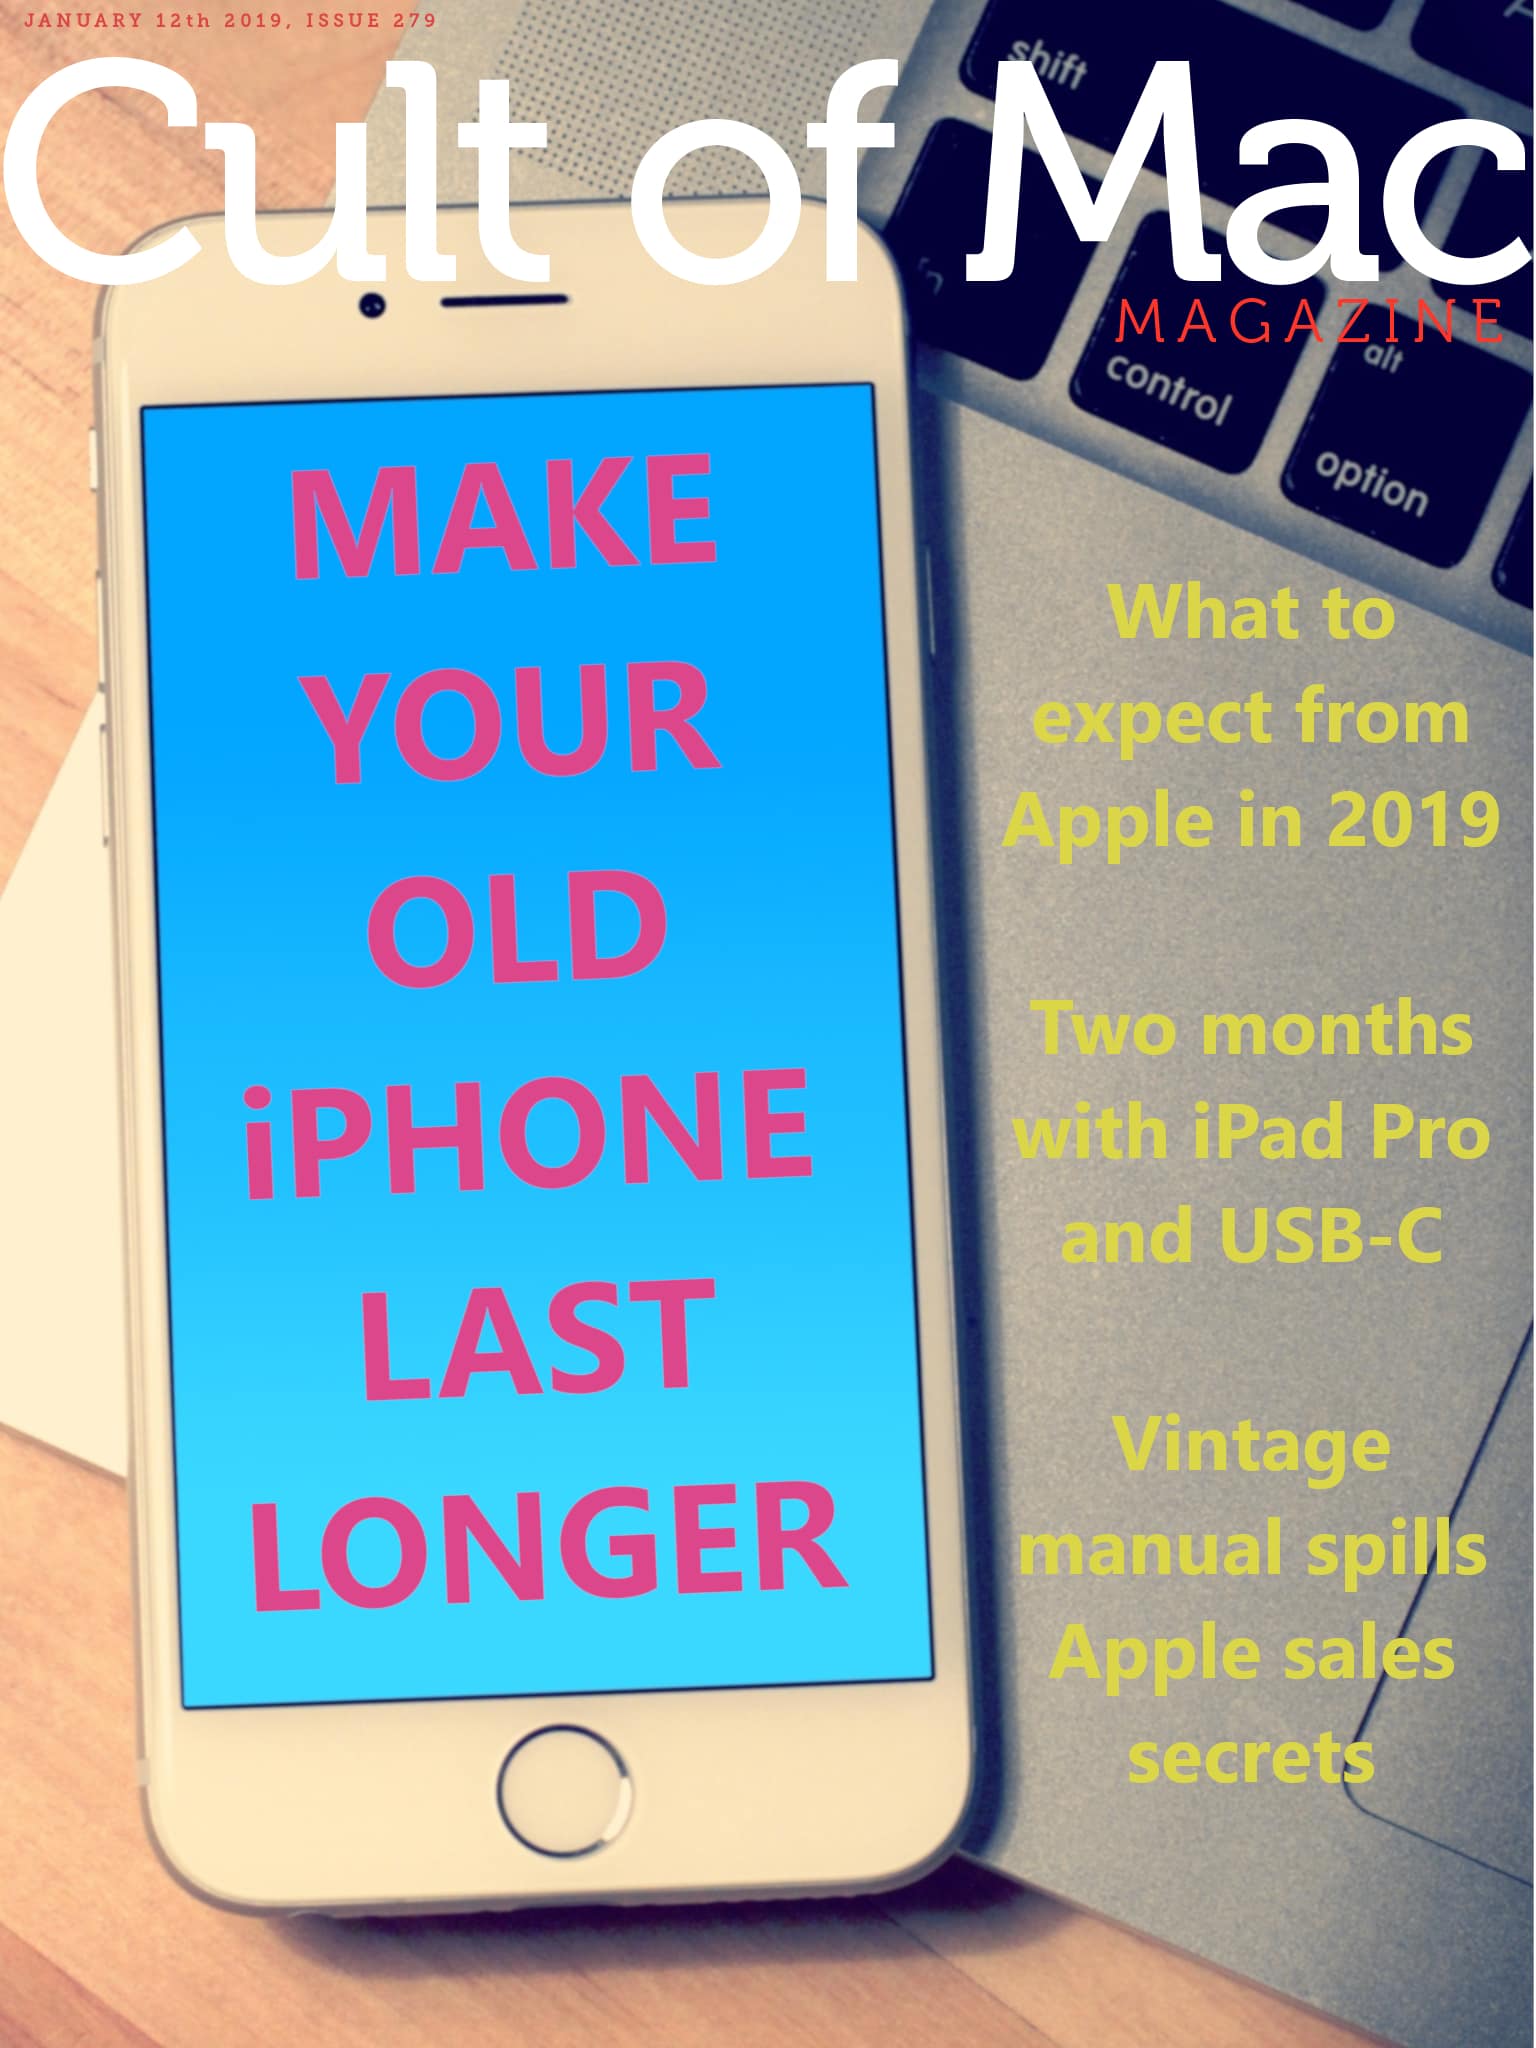 If you're not a serial upgrader, you can eke out even more life from your aging iPhone with these tips.